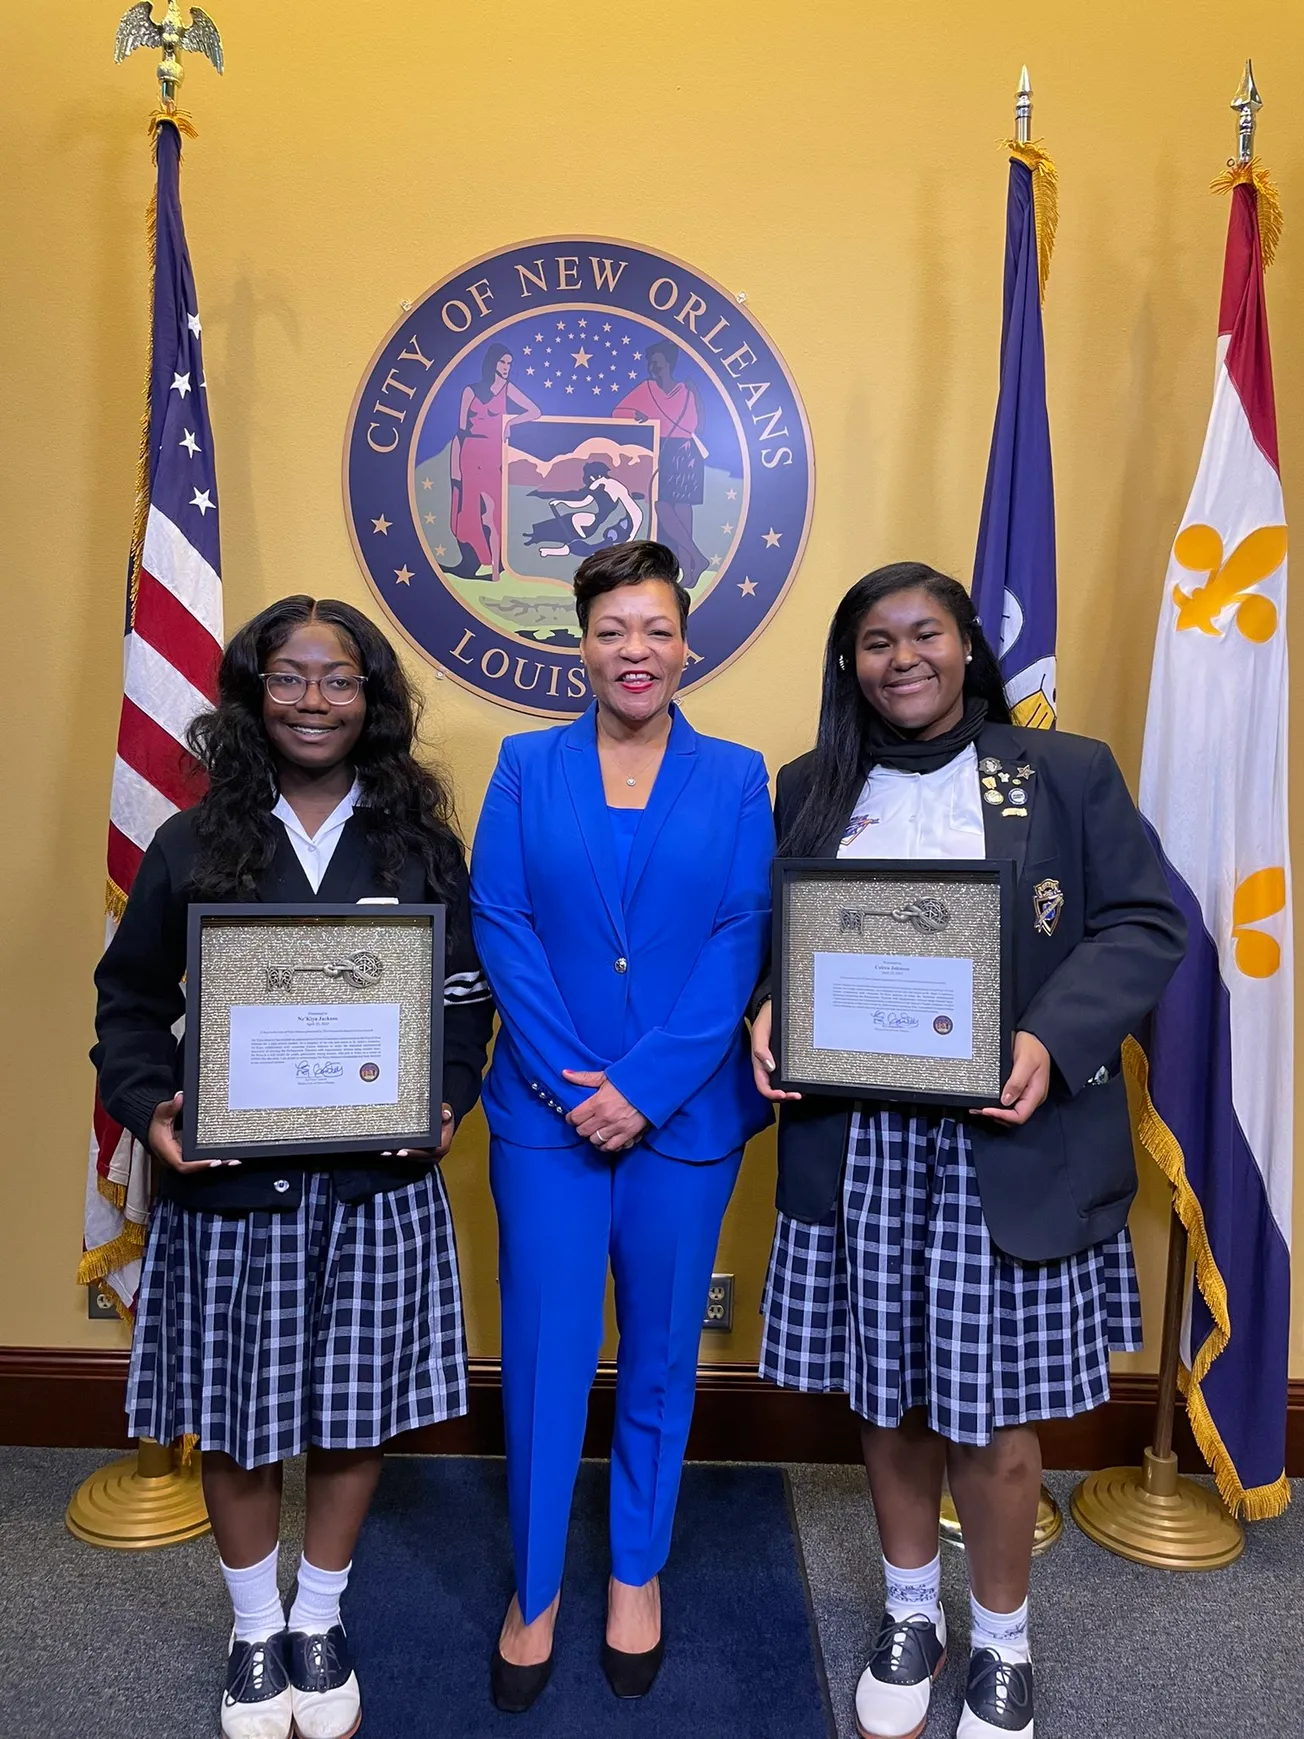 High school math whizzes receive keys to the city of New Orleans